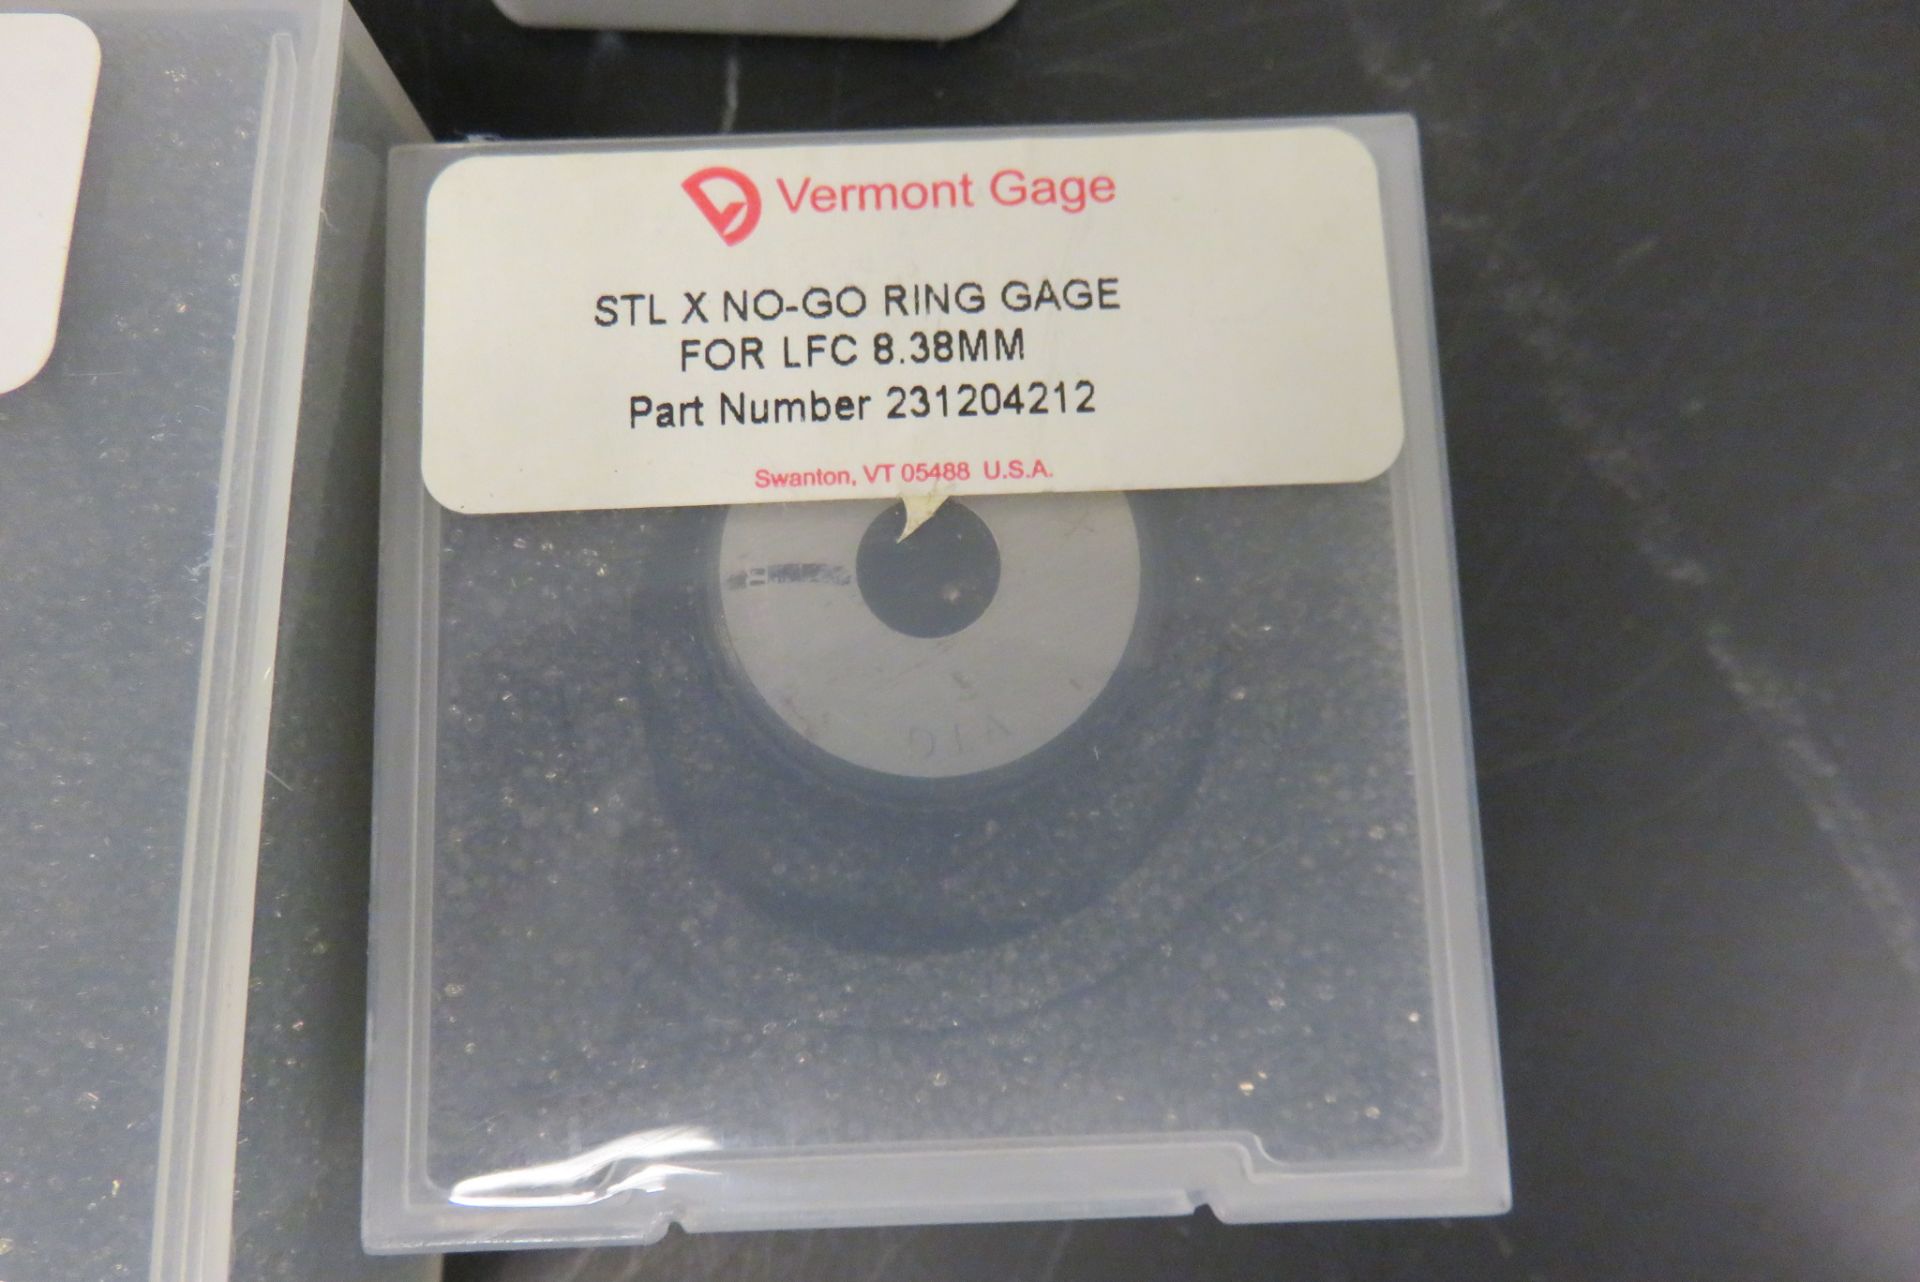 Vermont Gage assorted Gauges and Assorted ring gauges STLGO/NO-GO Rev assembly - Image 6 of 7